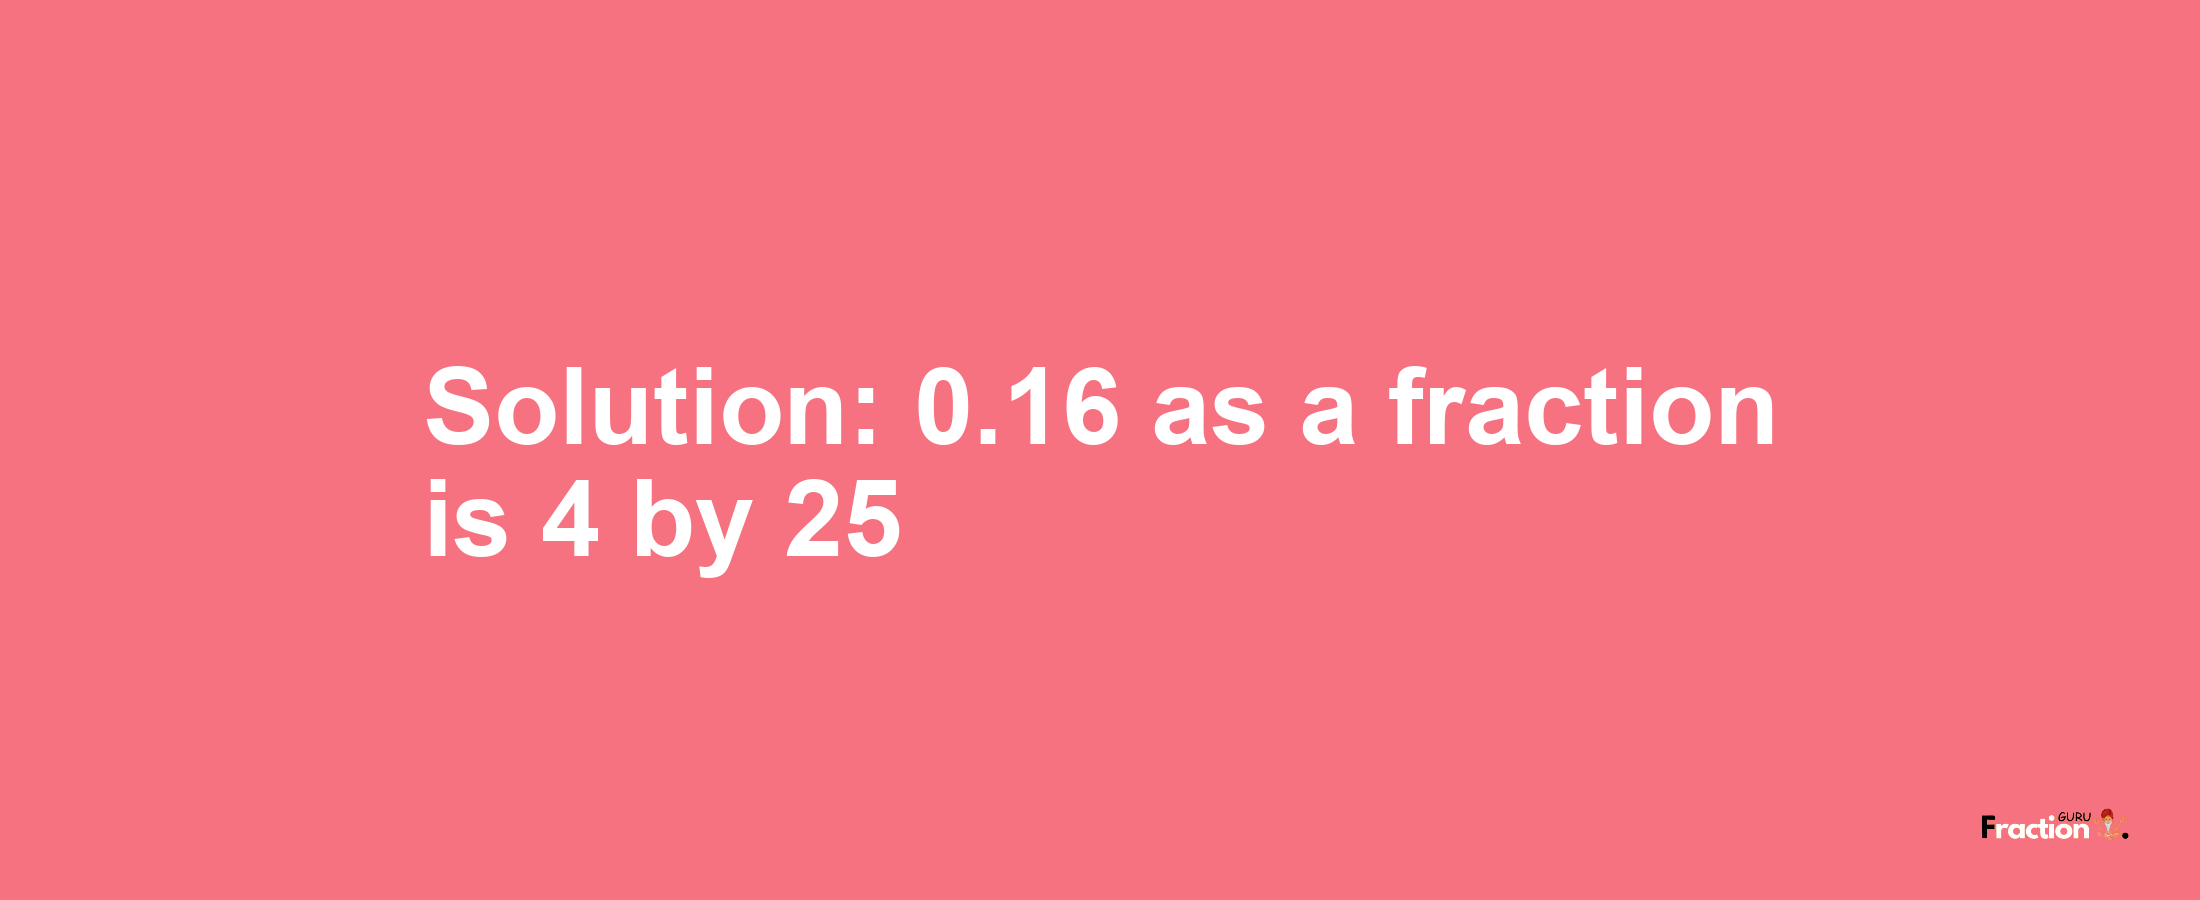 Solution:0.16 as a fraction is 4/25